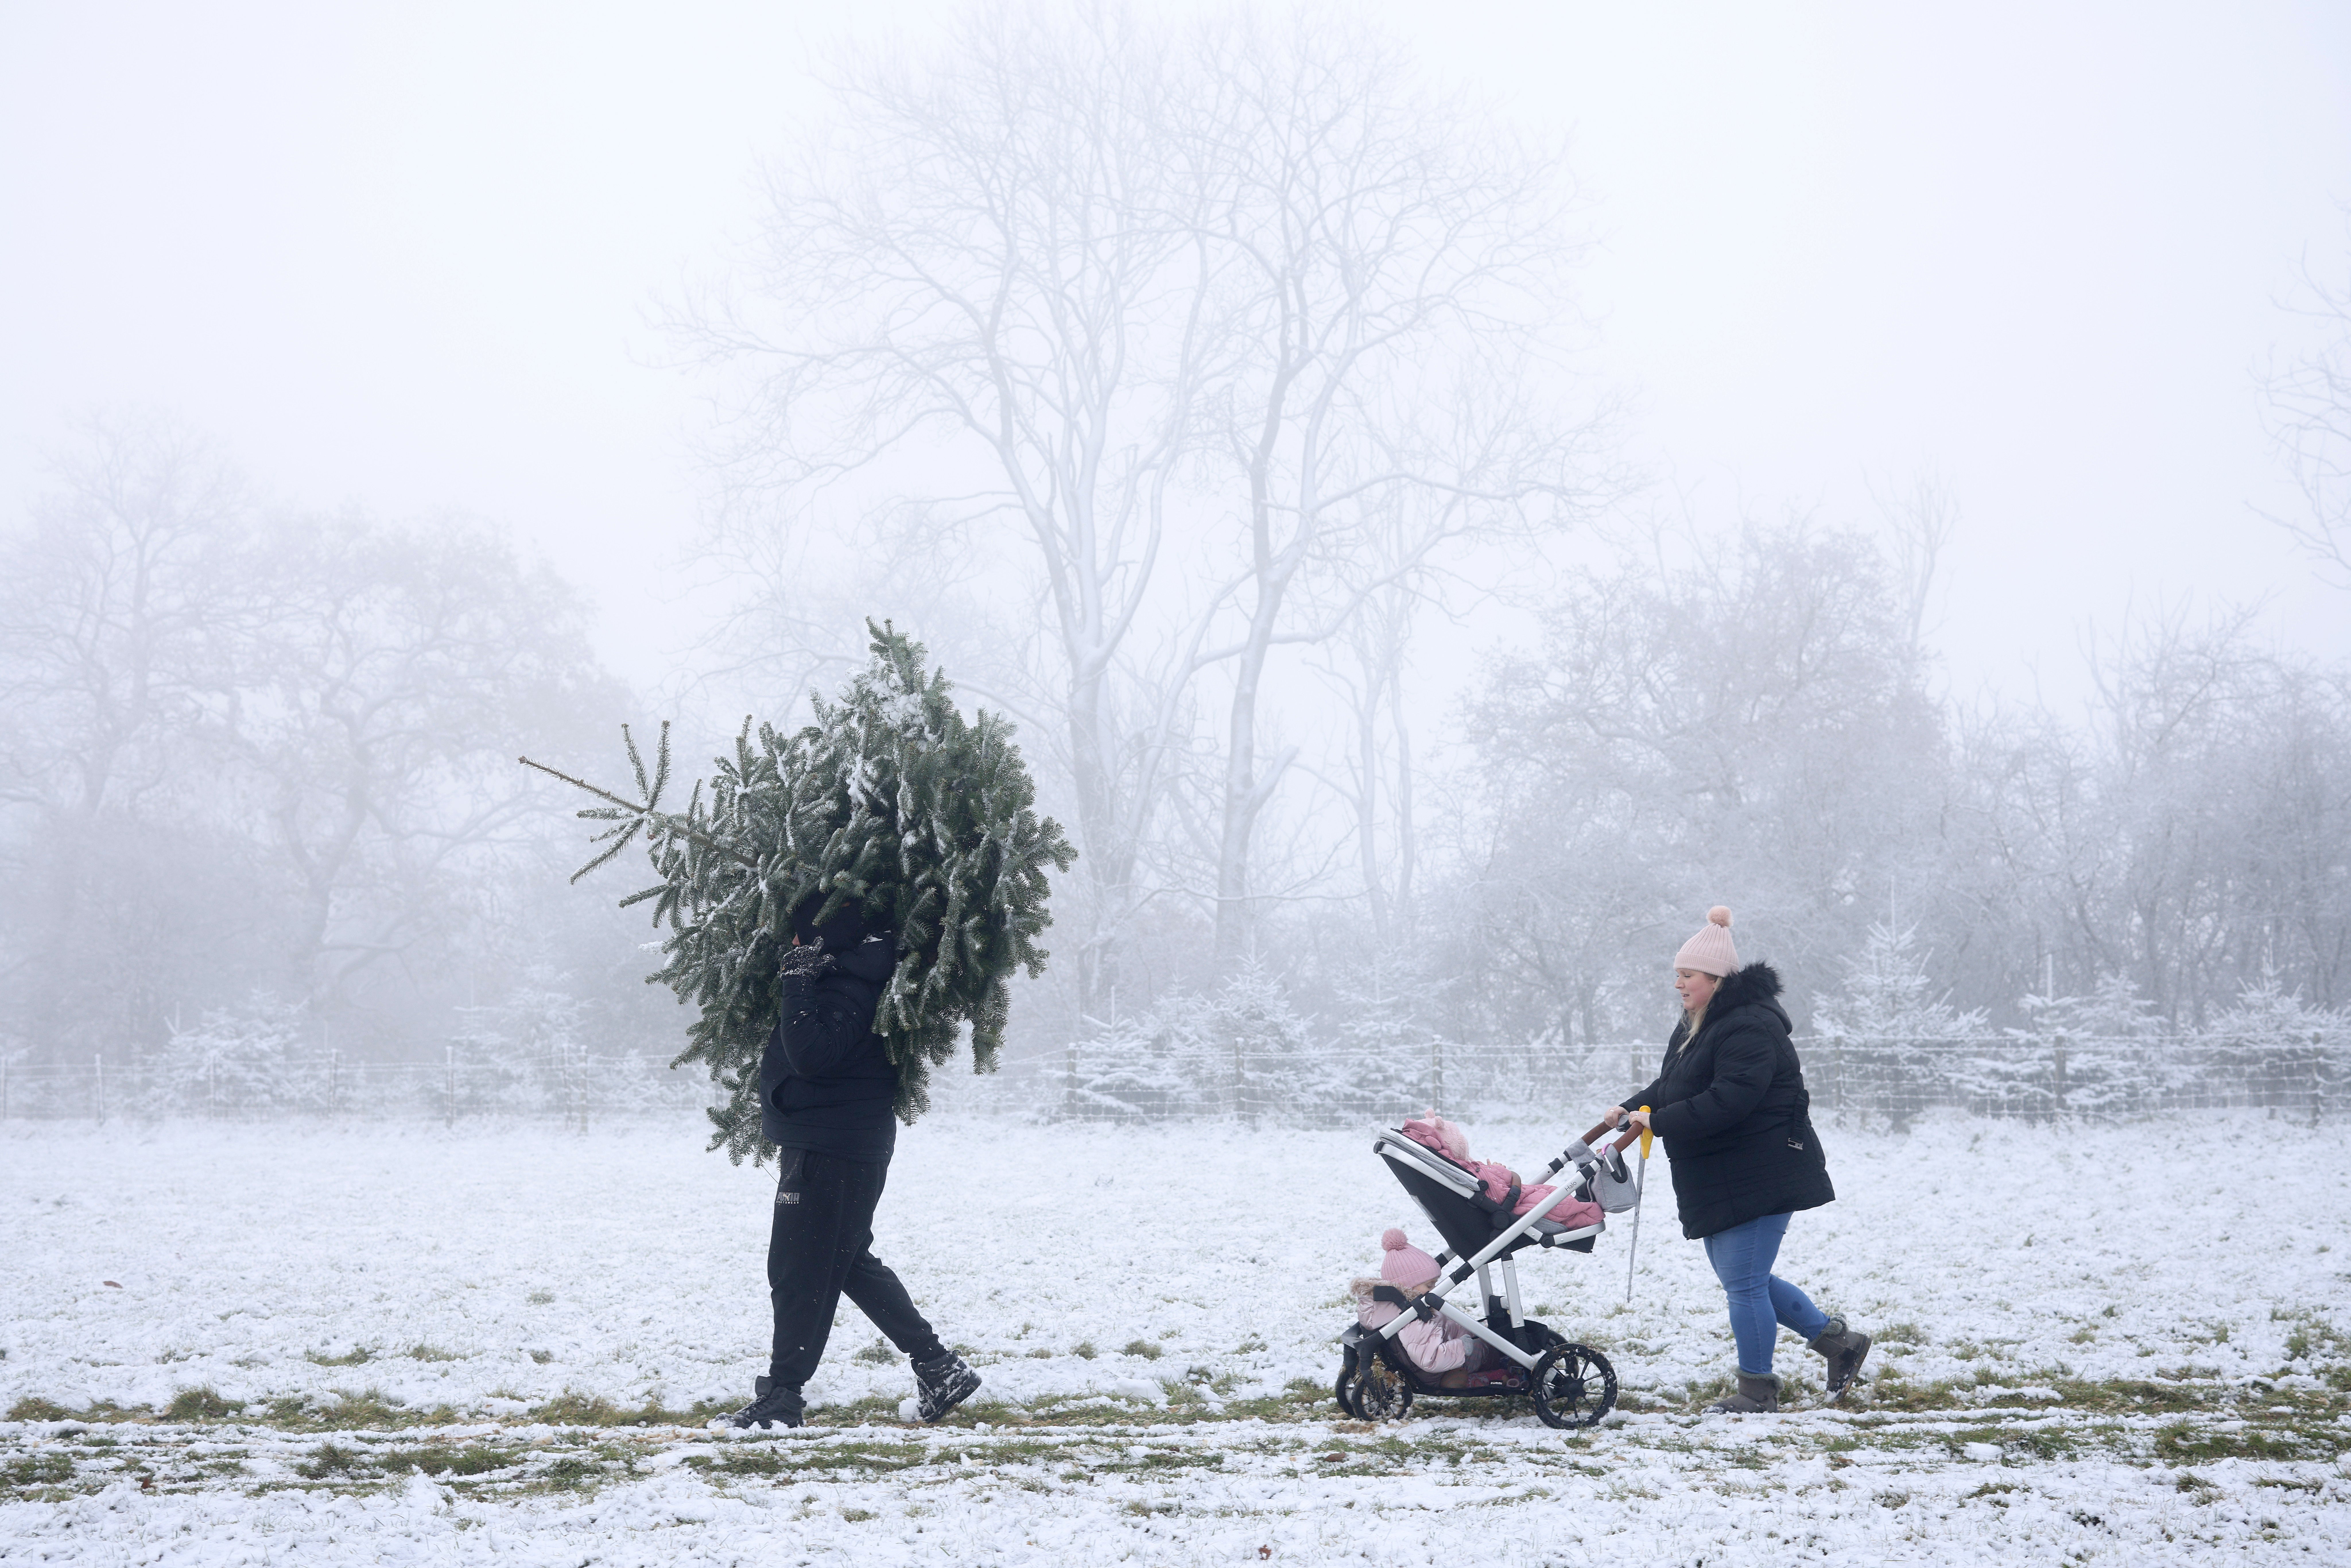 A family braves the snow to bring home the Christmas tree